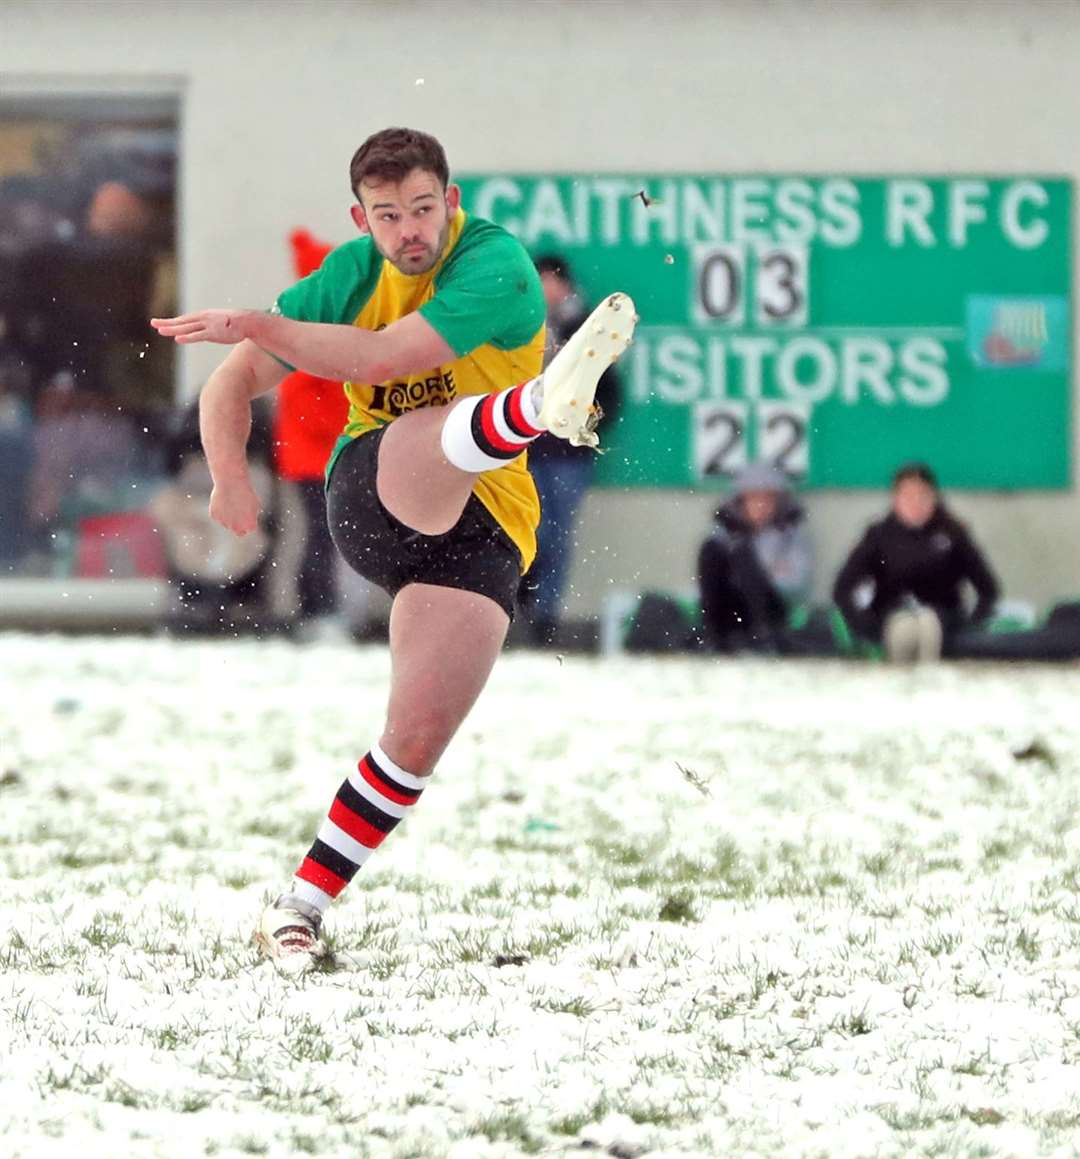 Liam Brims kicking for the touchline for the Exiles/Students during the Sinclair Cadzow memorial match at Millbank in December. Picture: James Gunn